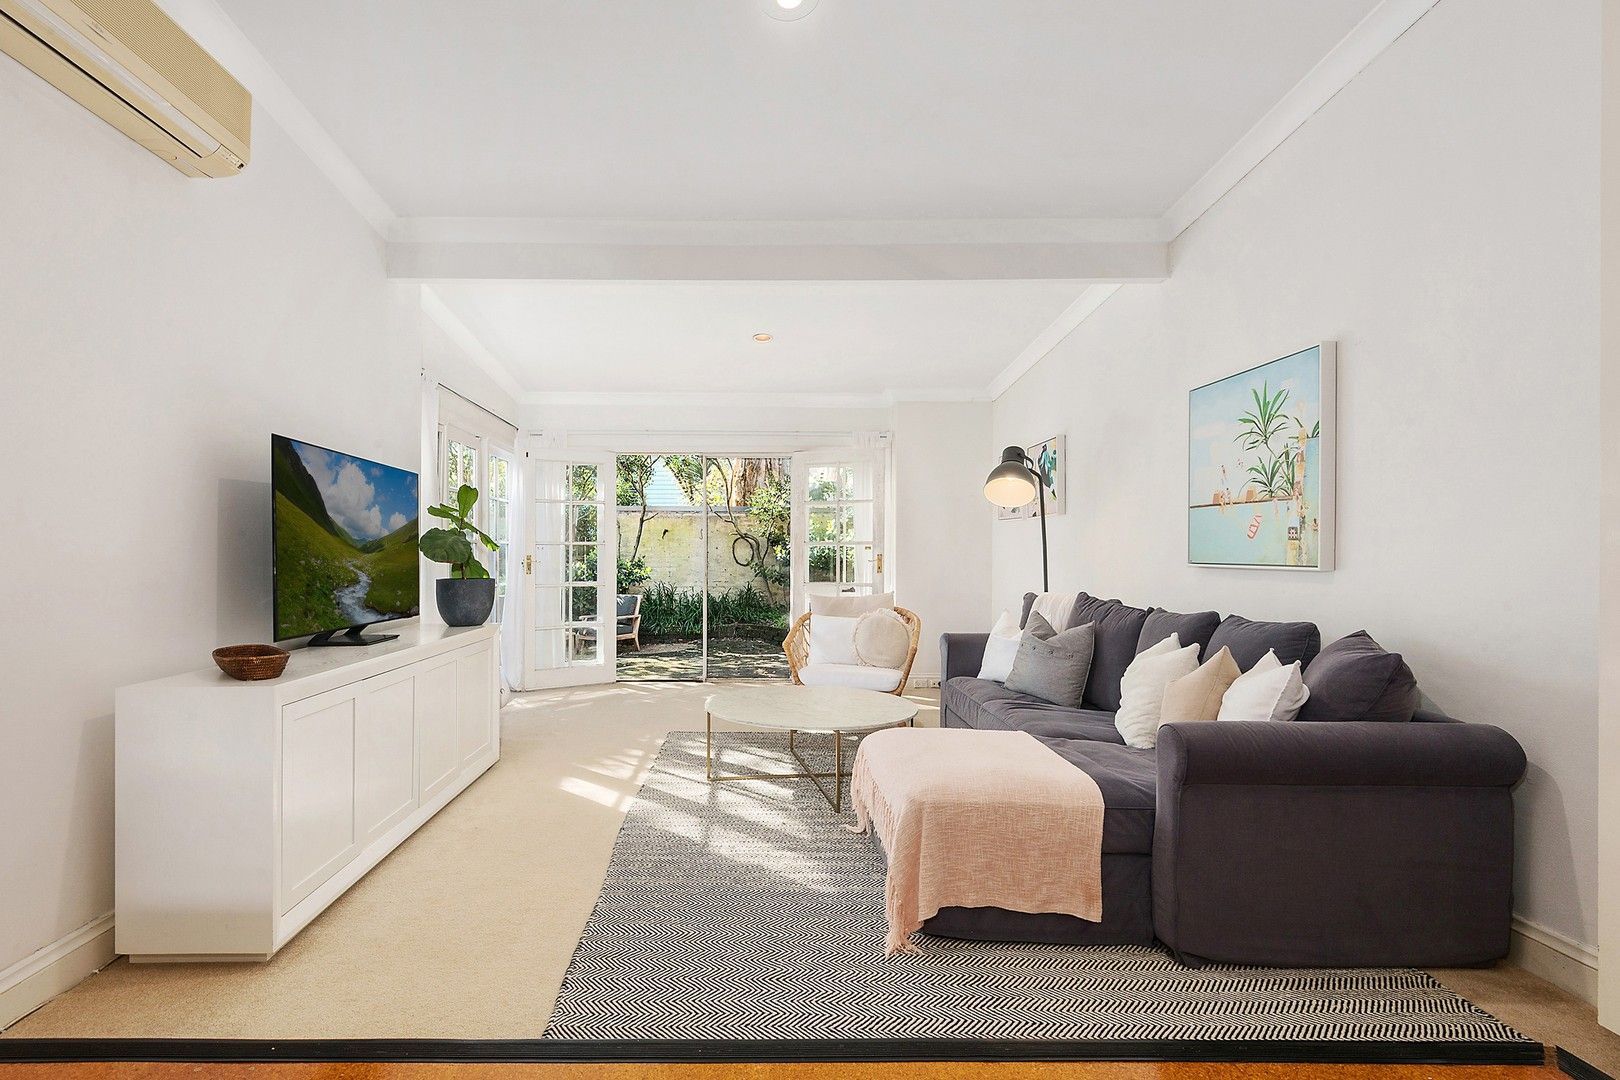 2 bedrooms House in 25 Spicer Street WOOLLAHRA NSW, 2025